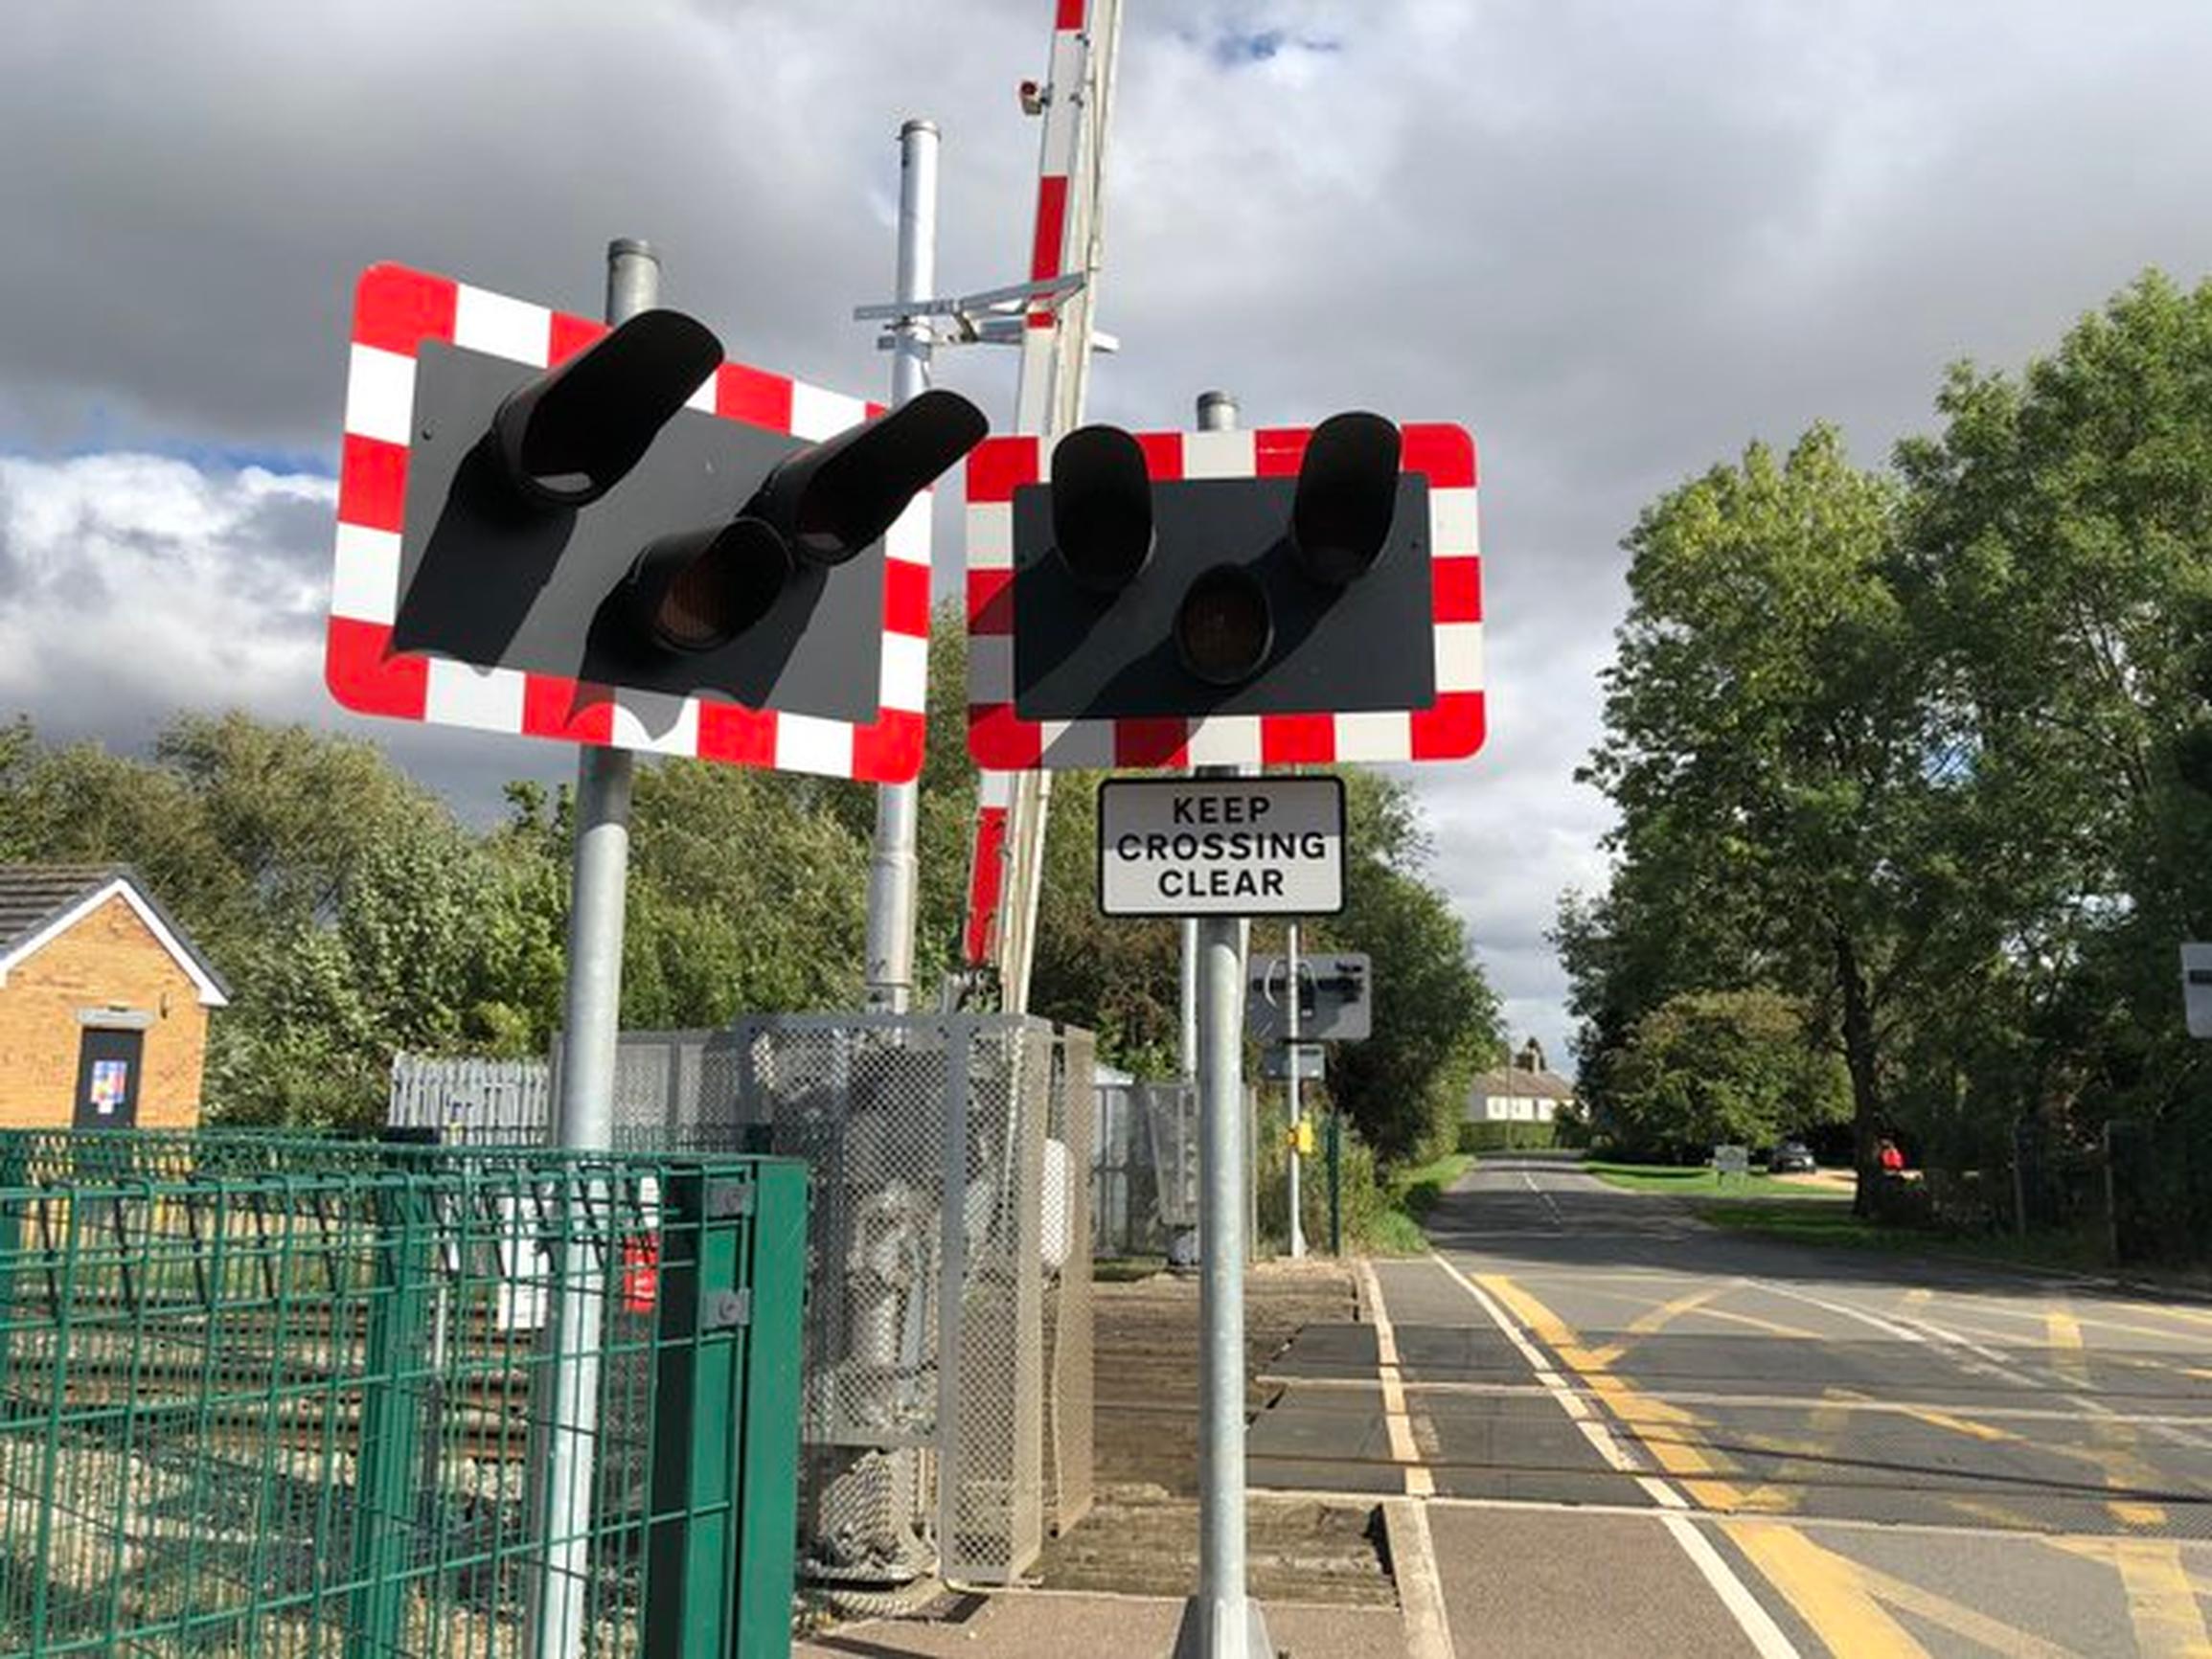 Britain has around 5,800 level crossings on the mainline railway with around another 1,500 on heritage and minor railways